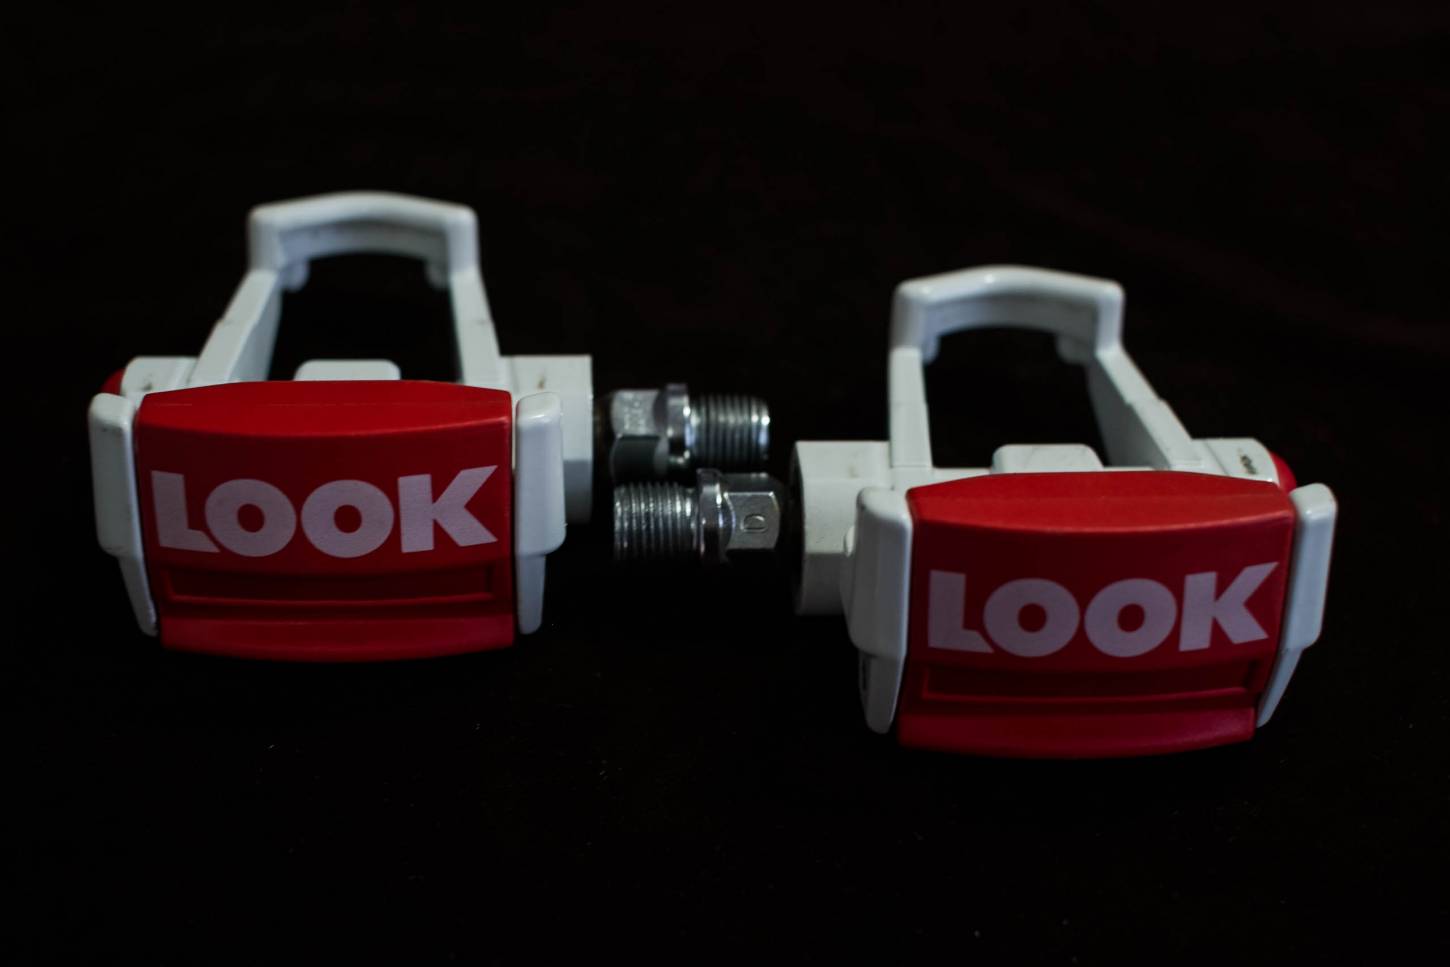 Look Clipless Pedals Vintage 9/16" x 20 thread white / red aluminium road bike